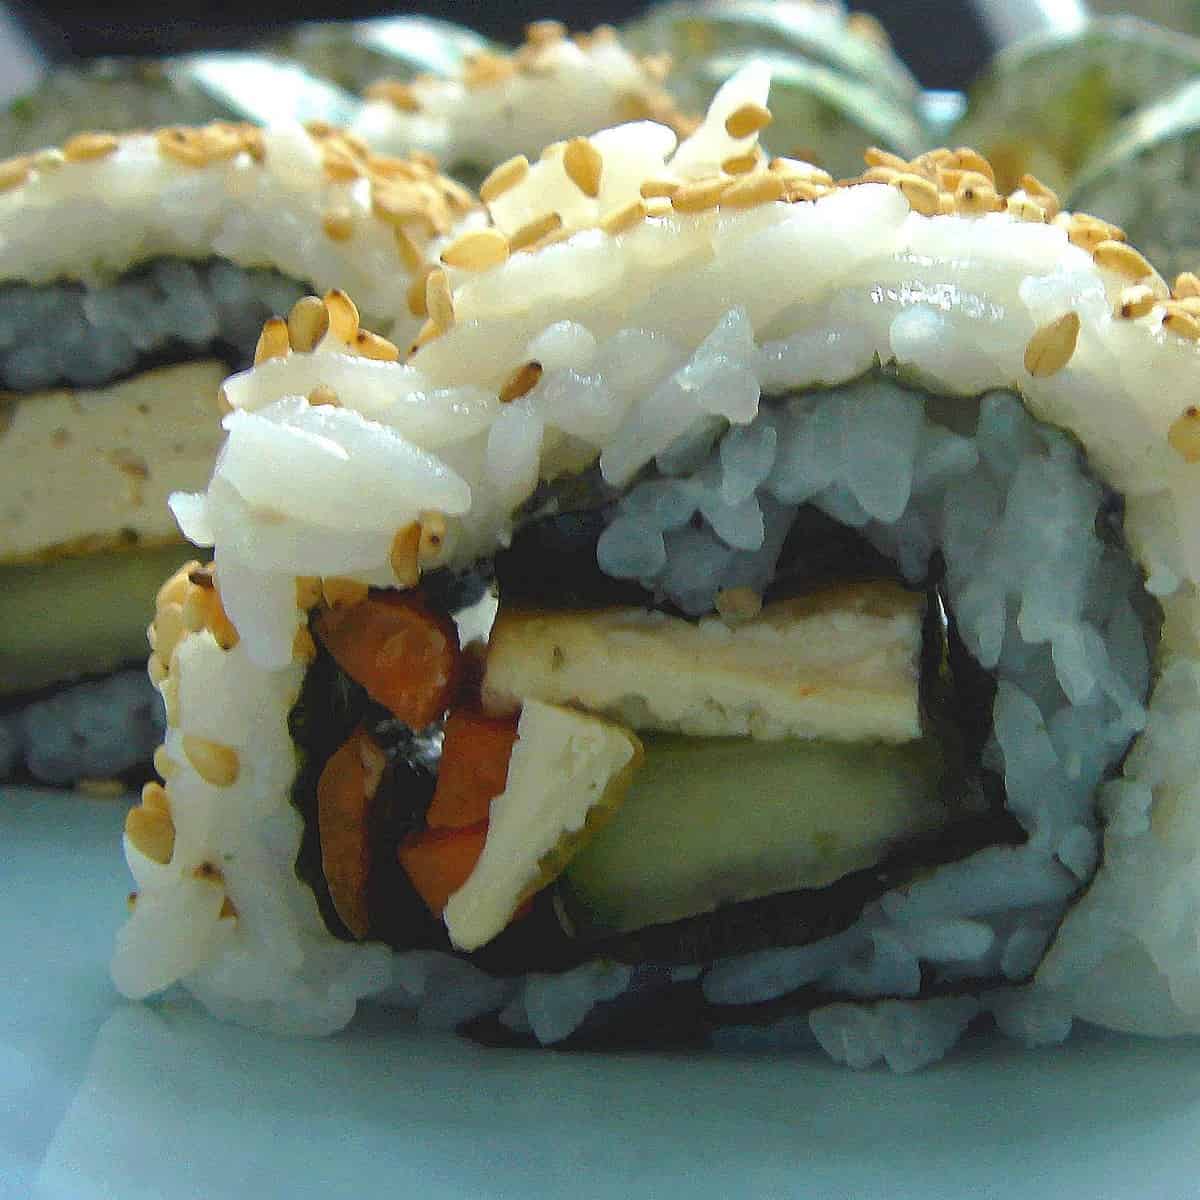  These tofu maki rolls will satisfy even the biggest sushi-loving appetite.